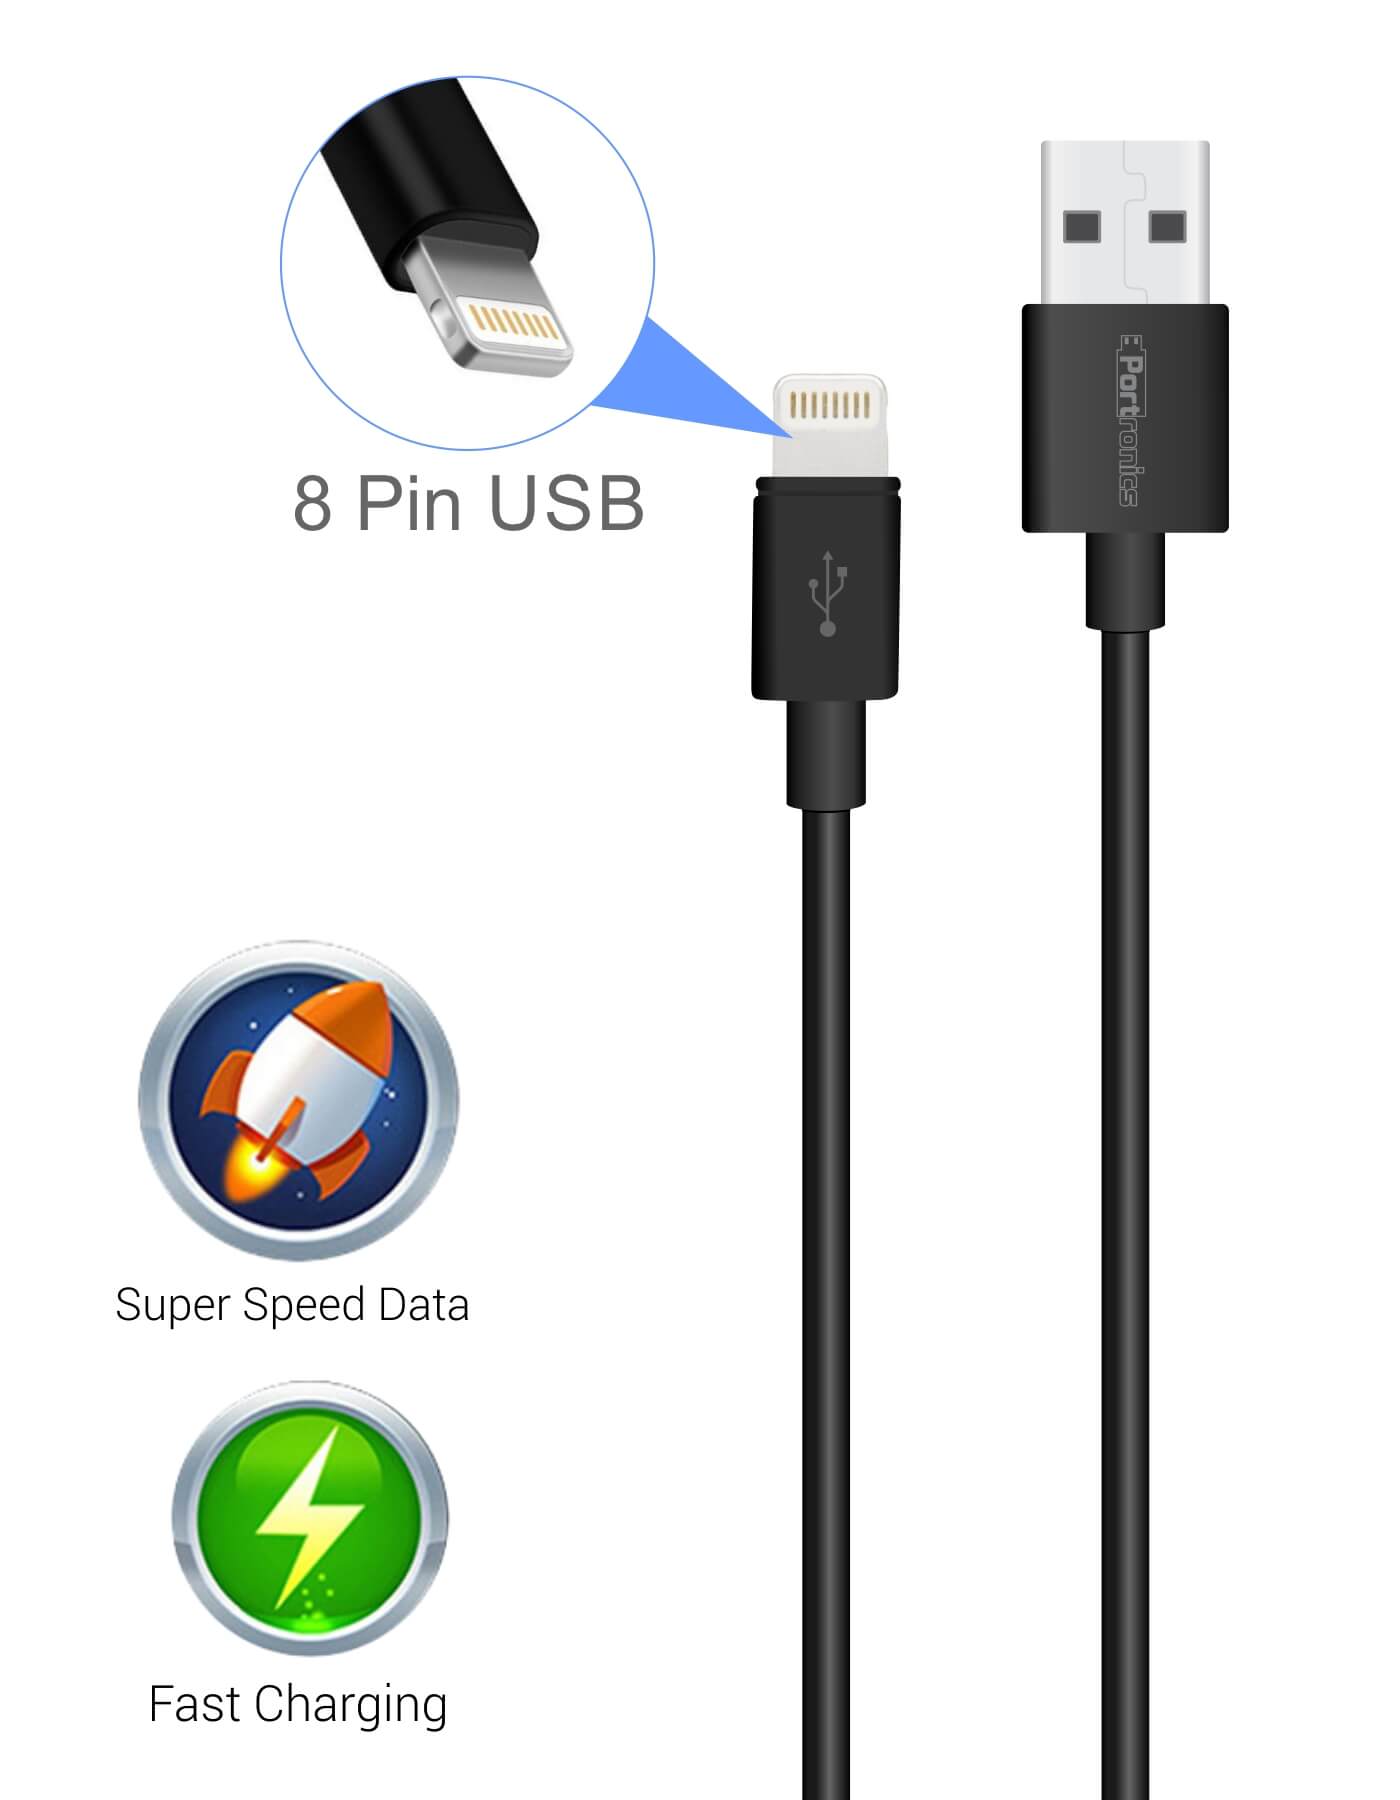 Portronics Konnect Core Plus 8-Pin USB Charging Cable fats charging and fast data transfer